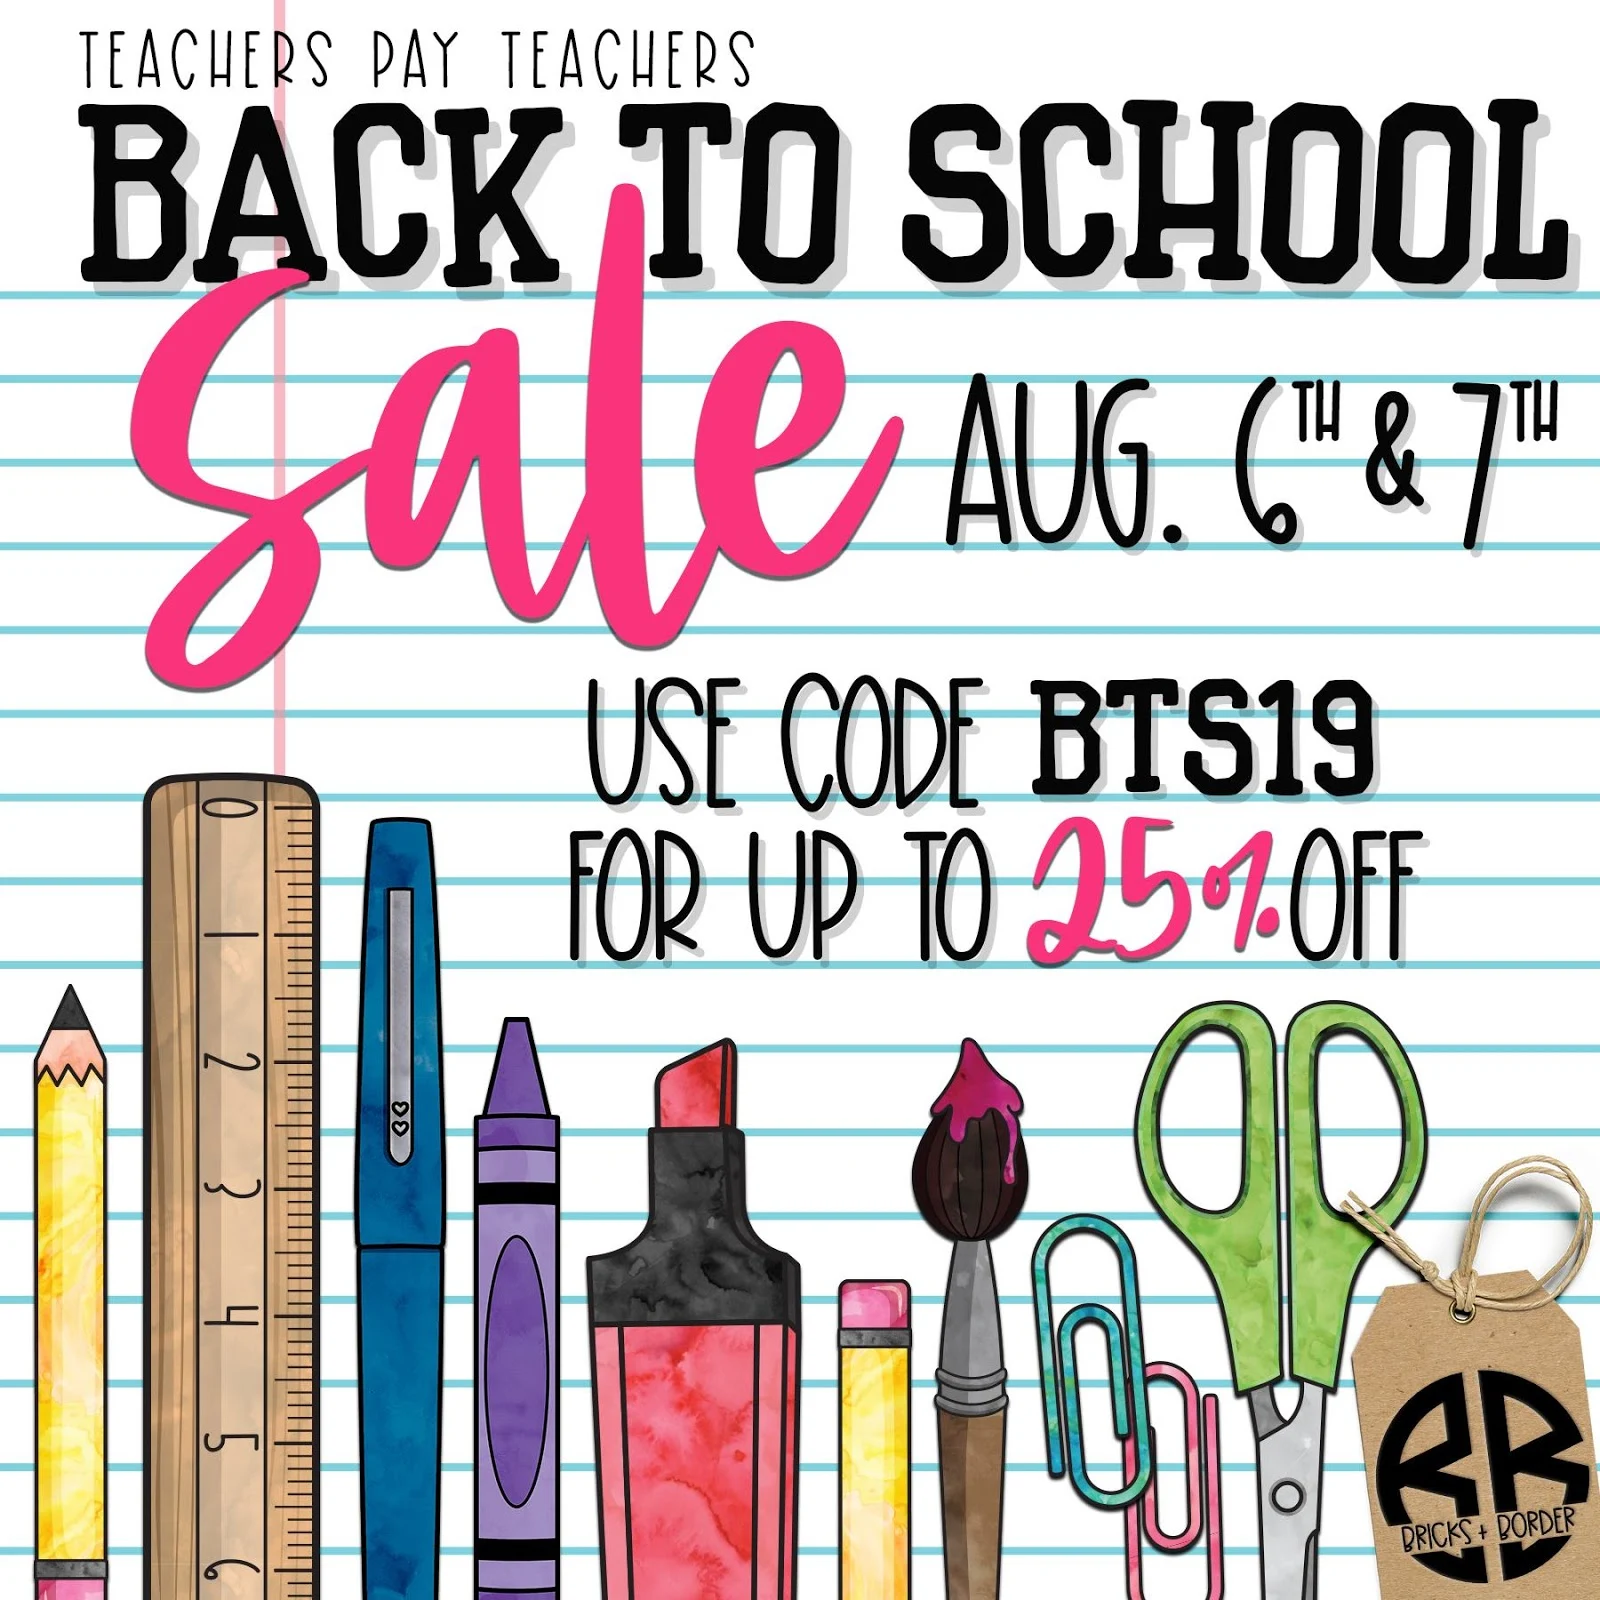 Find great deals for the start of school & the rest of the year at The ESL Nexus during TpT's BTS Sale on August 6 & 7, 2019!